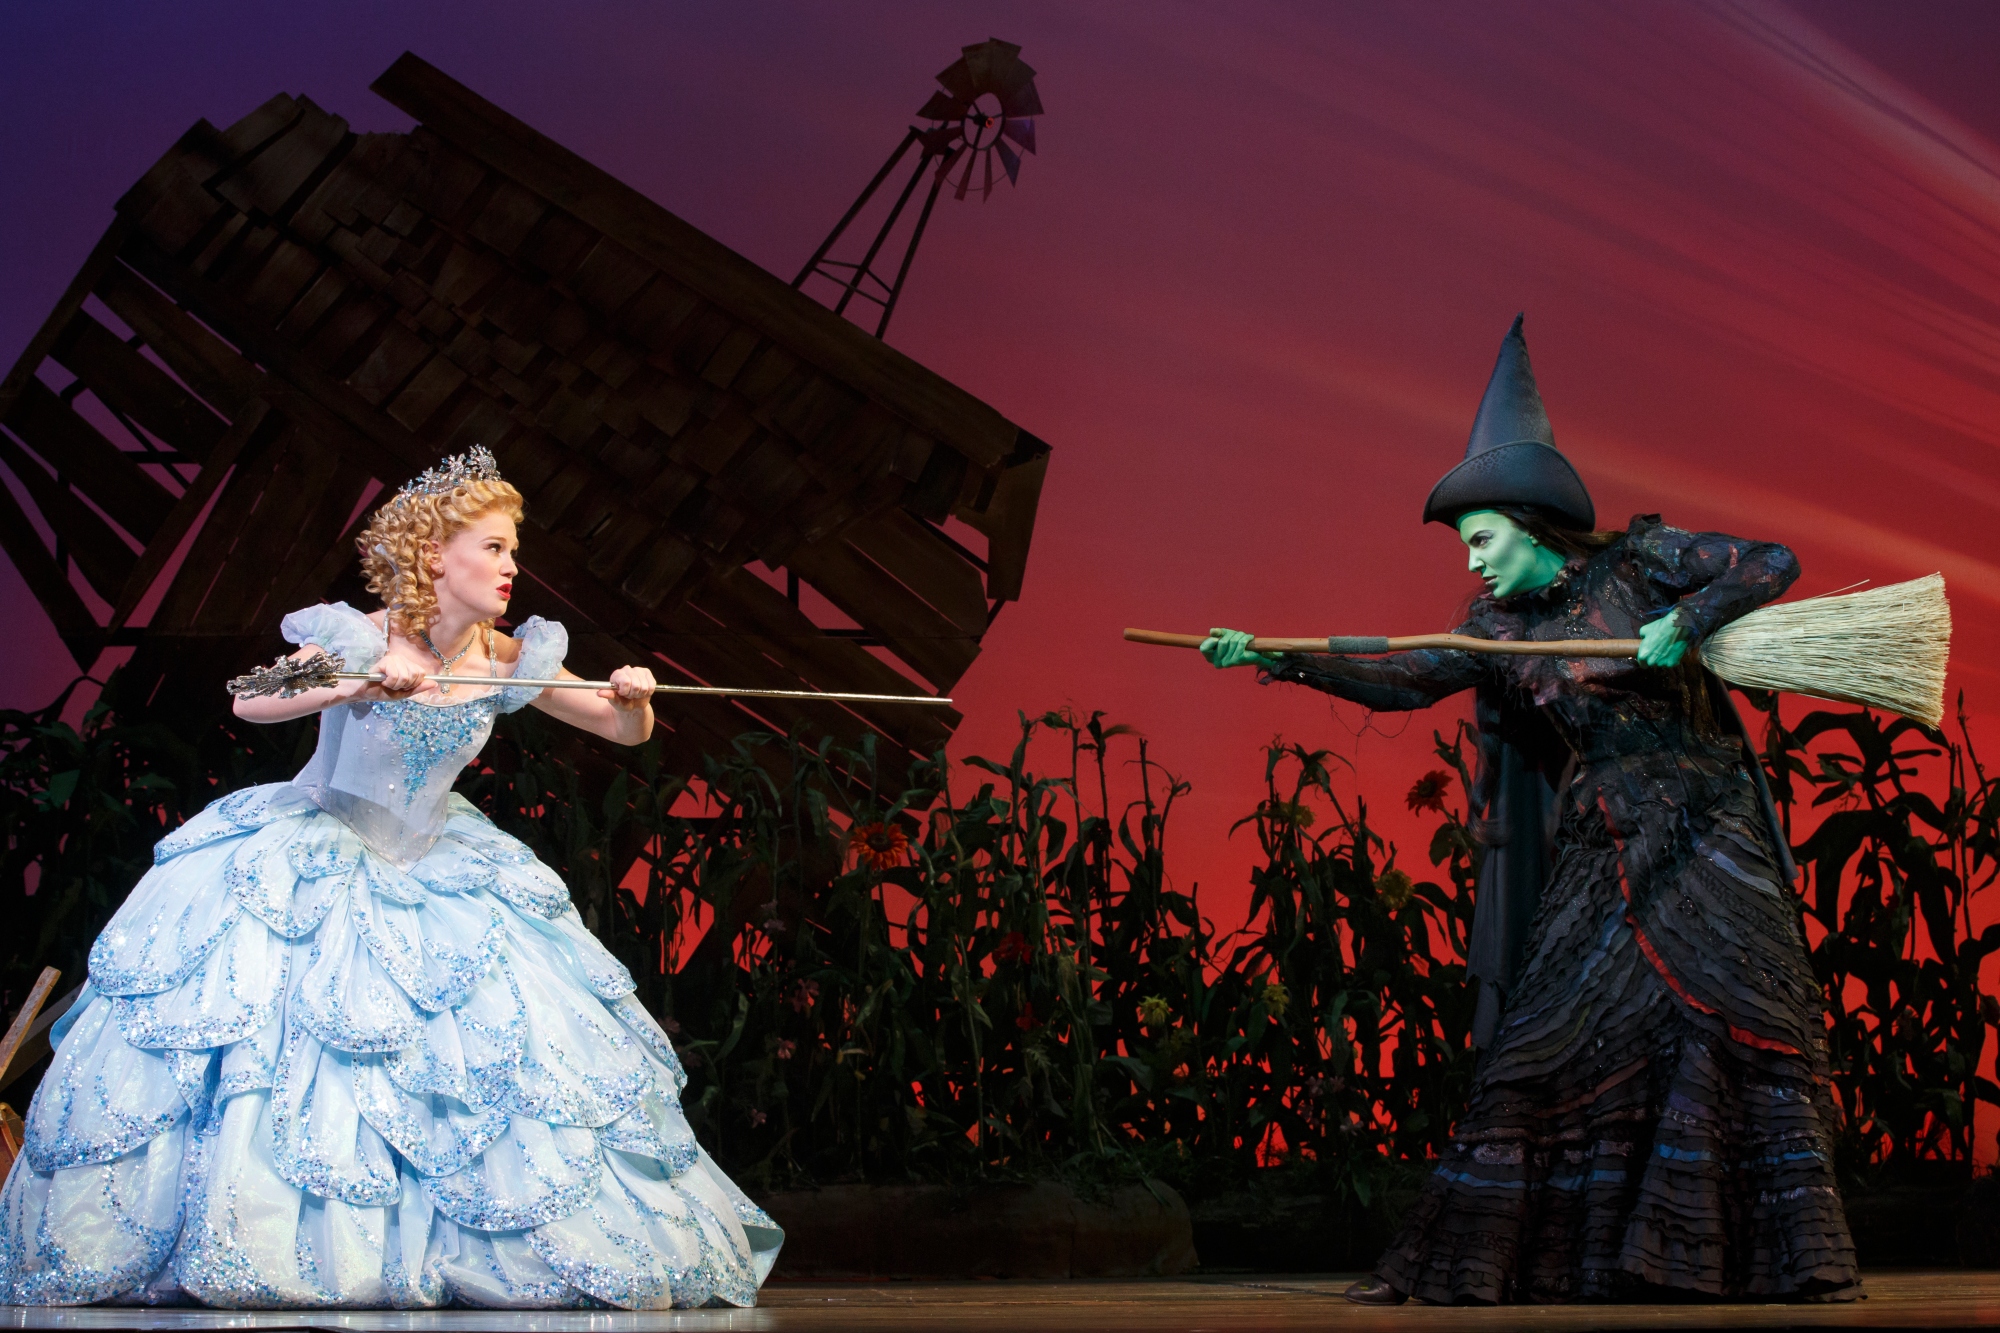 WICKED is presented by Dallas Summer Musicals April 19-May 22, 2016 at Music Hall at Fair Park.